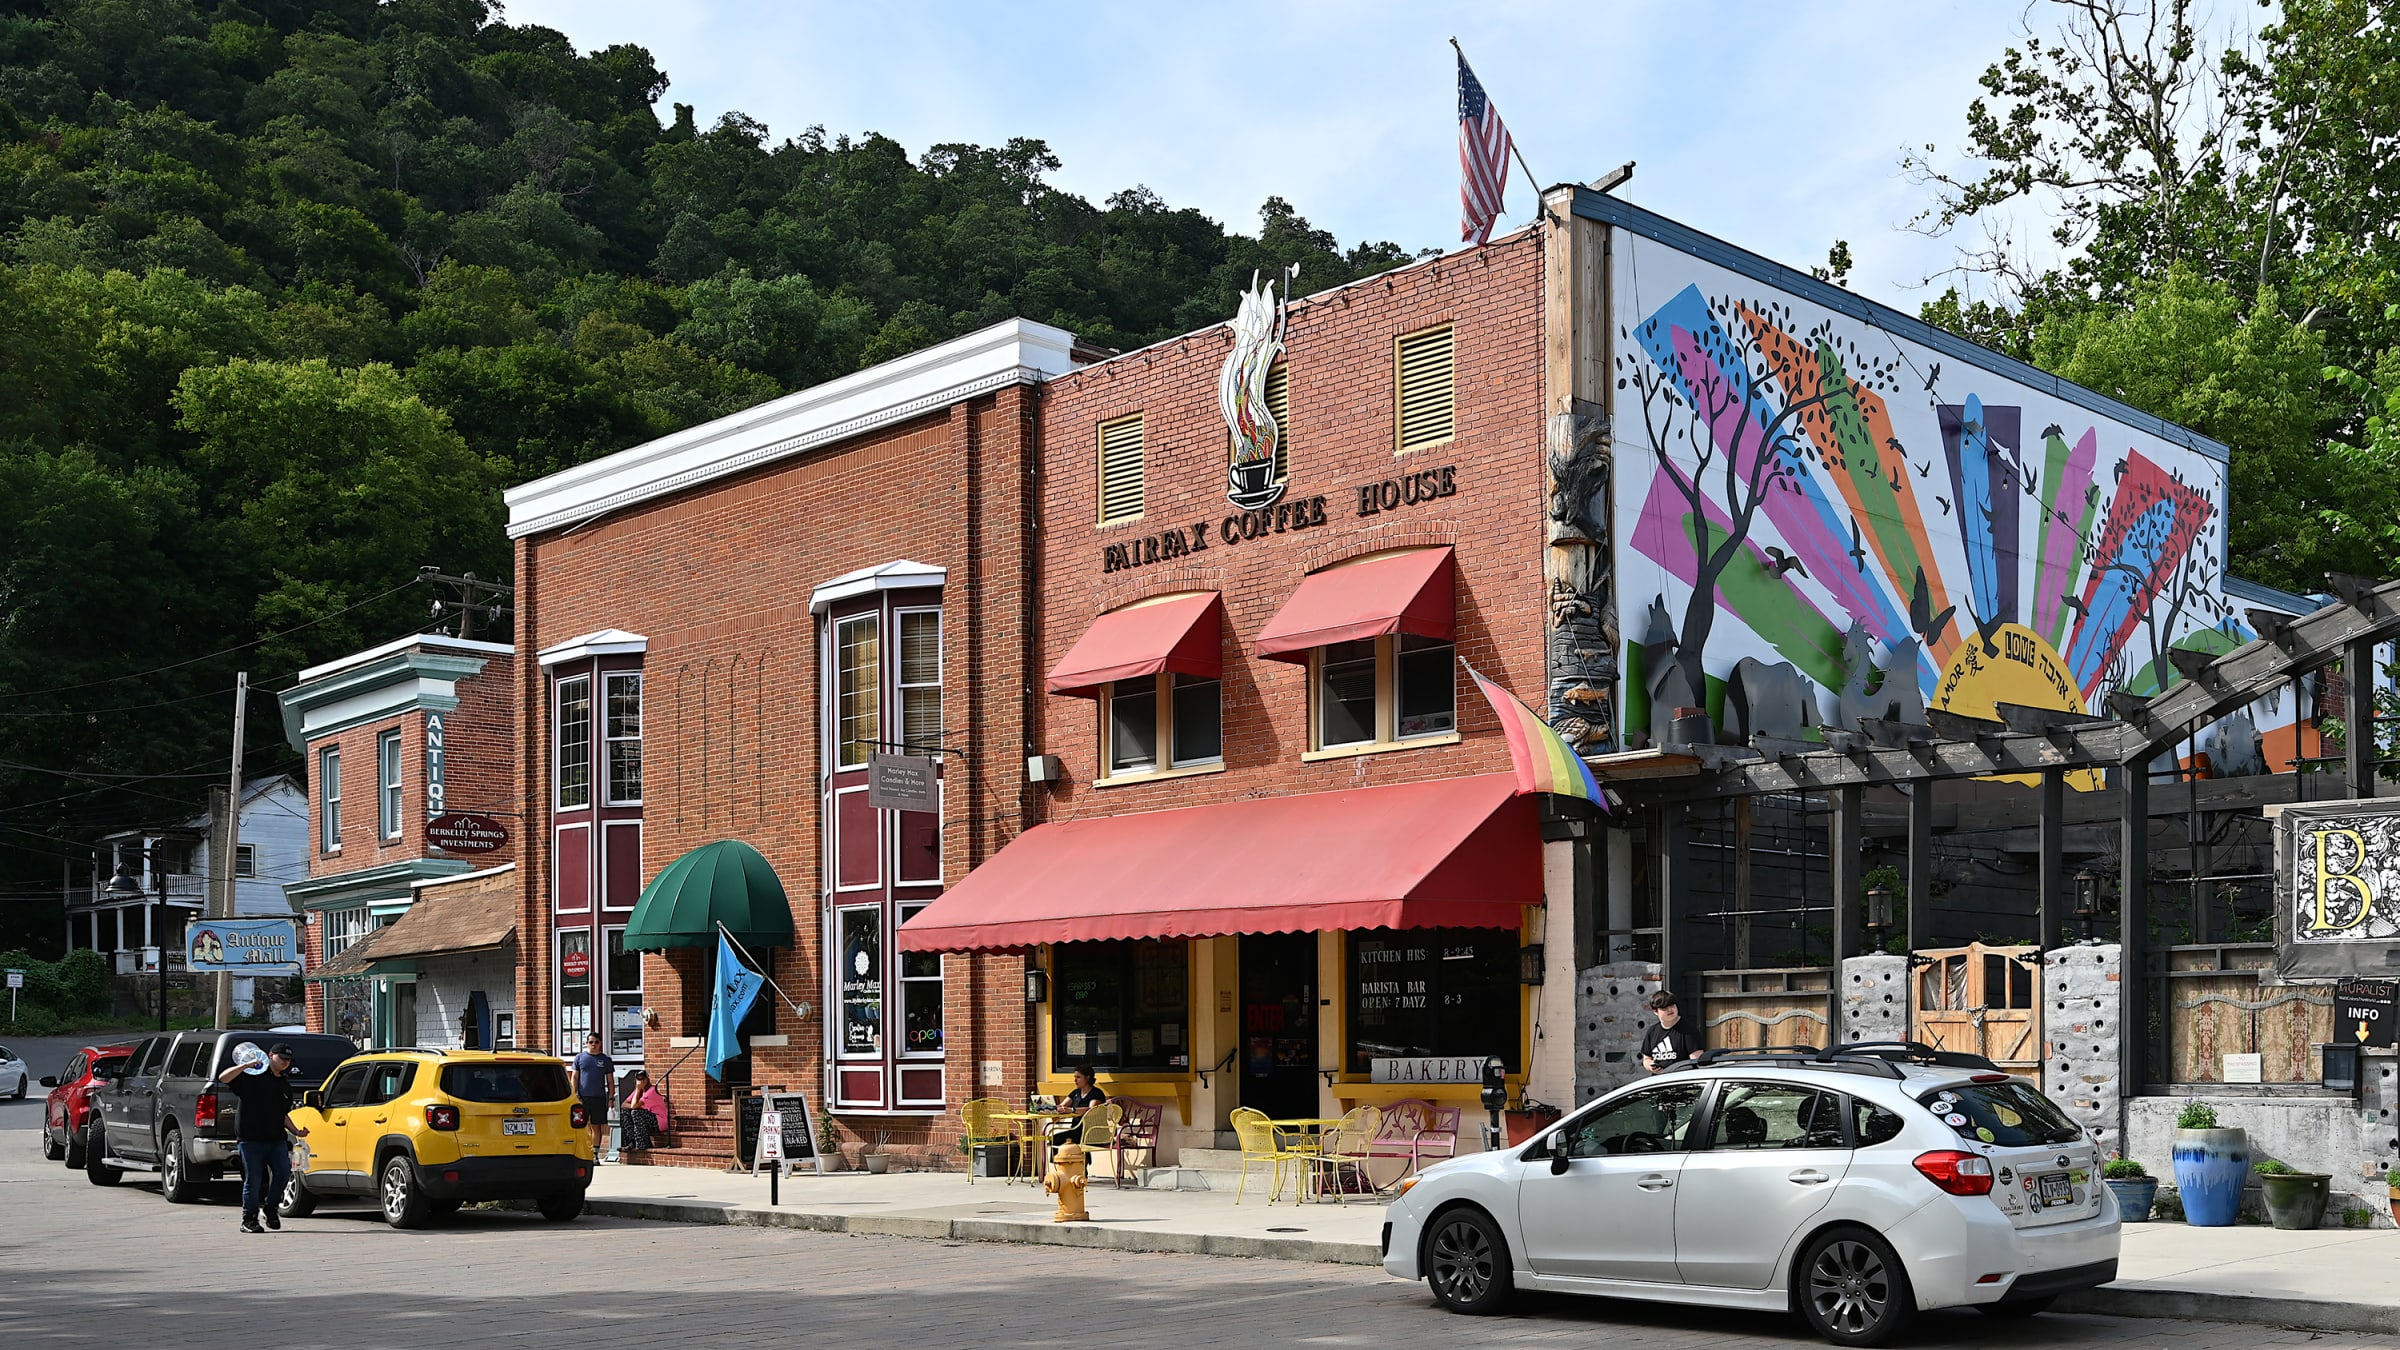 Berkeley Springs, the Town Where George Washington Went to Relax, is Pretty Cute picture